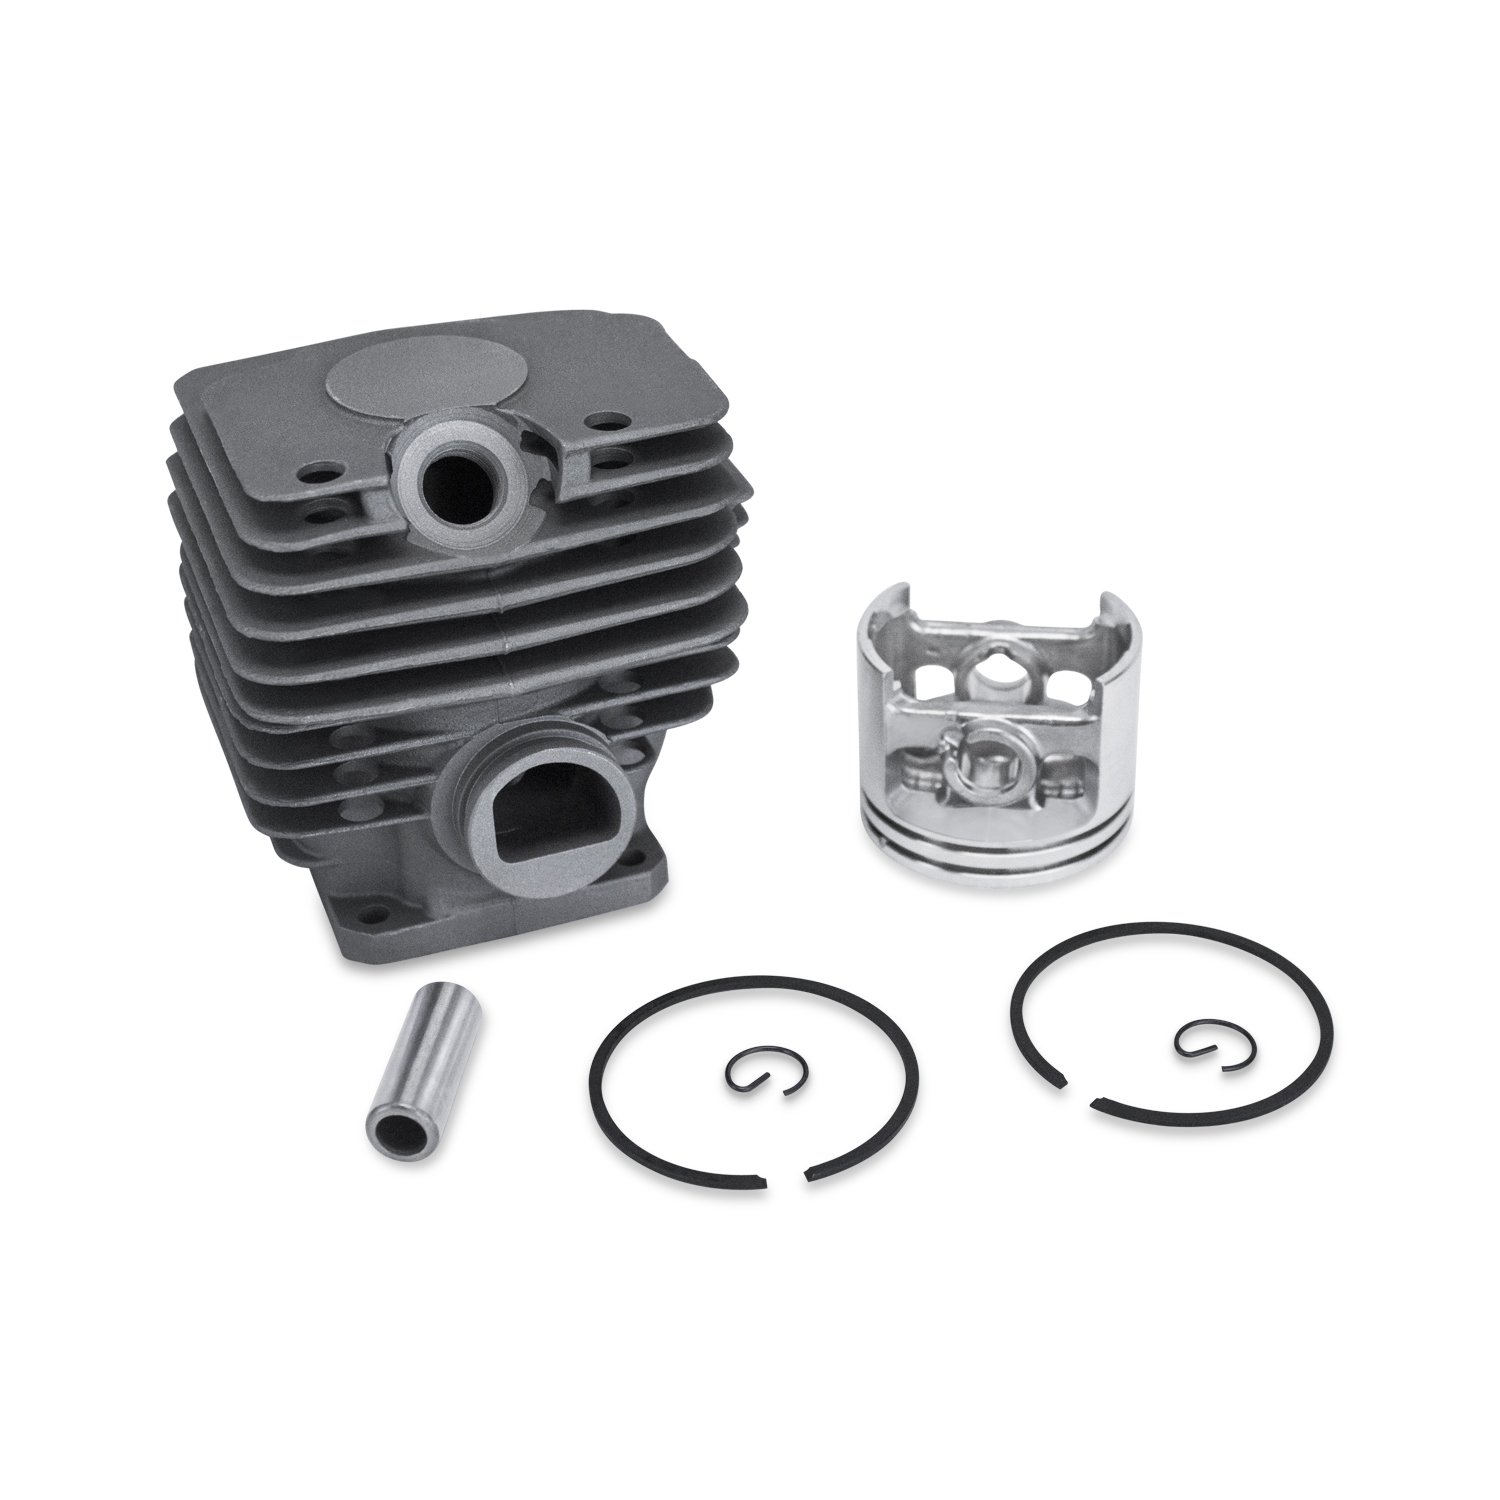 Global Cylinder and Piston Set for STIHL MS381